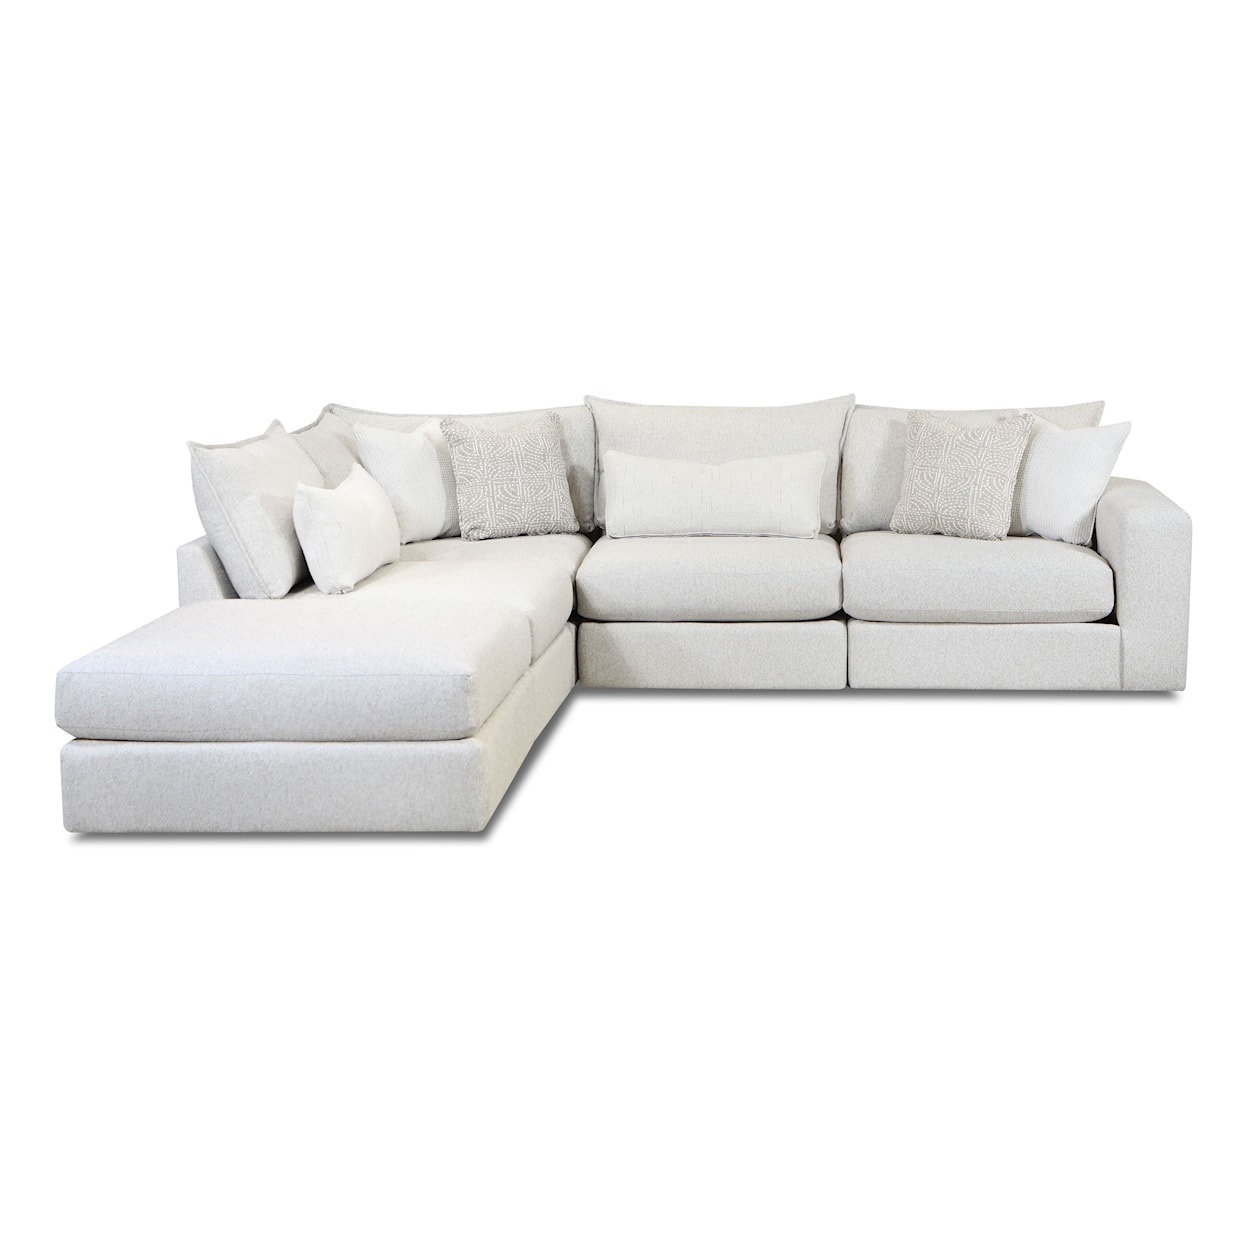 Fusion Furniture 7000 HOGAN COTTON Modular Sectional Sofa with Chaise